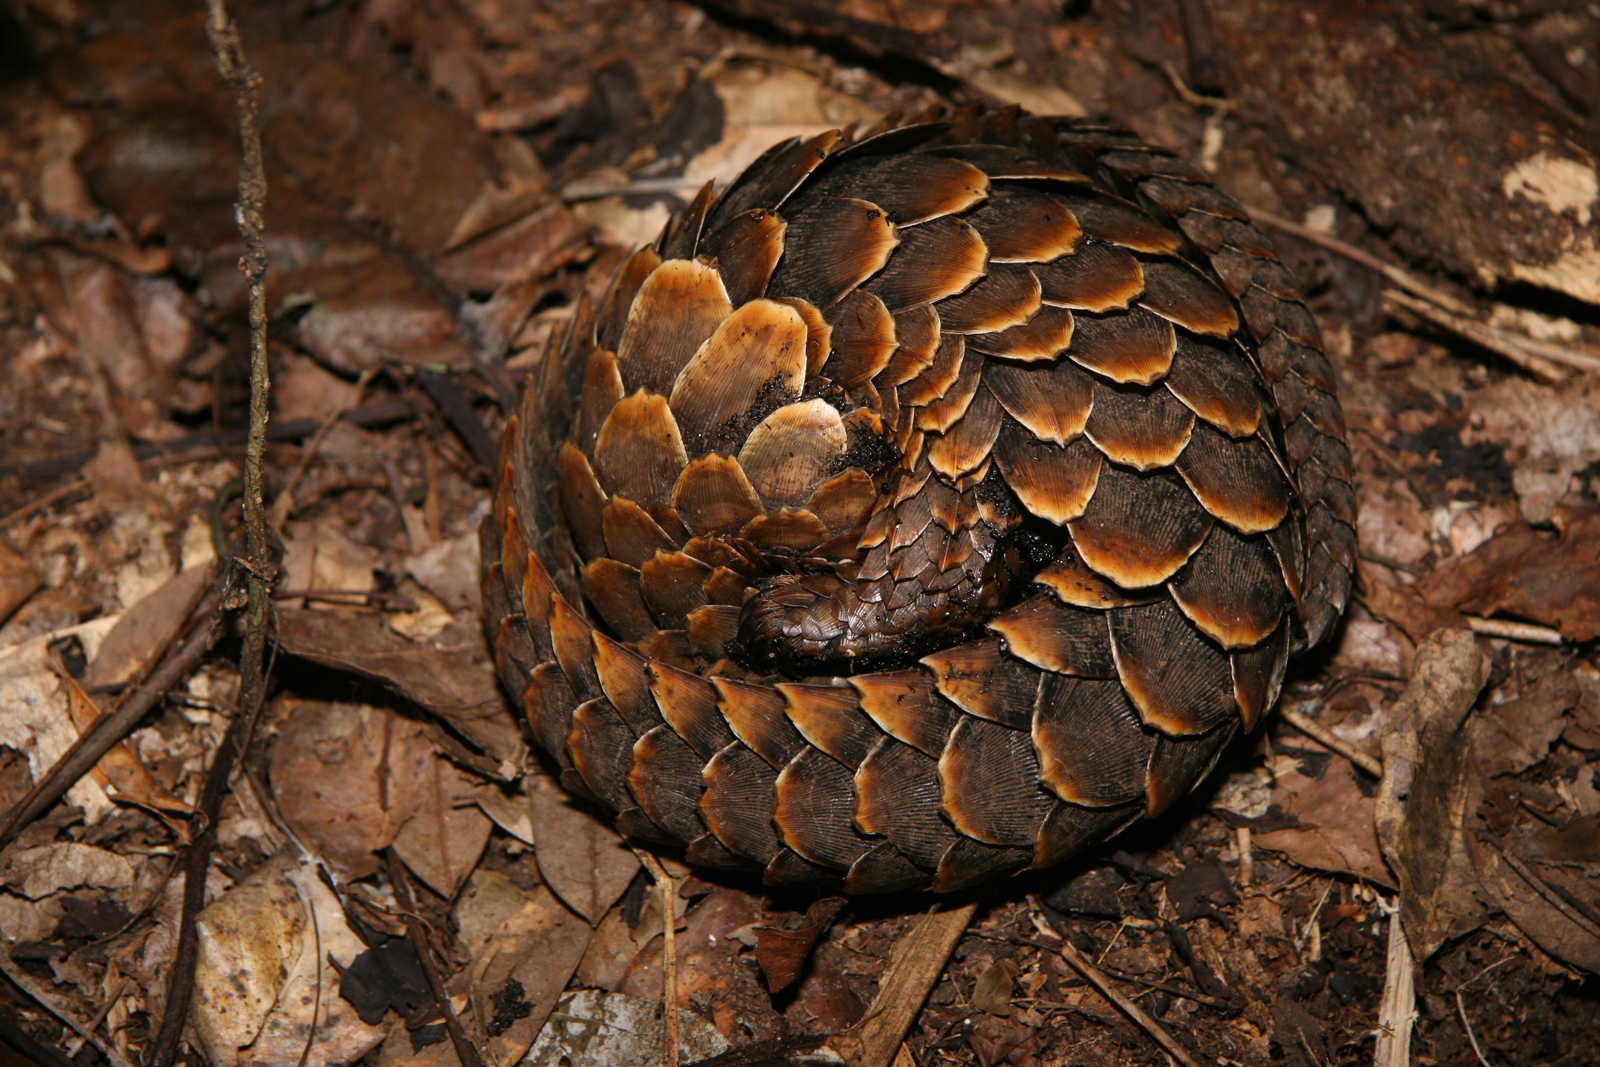 A black-bellied pangolin rolled up